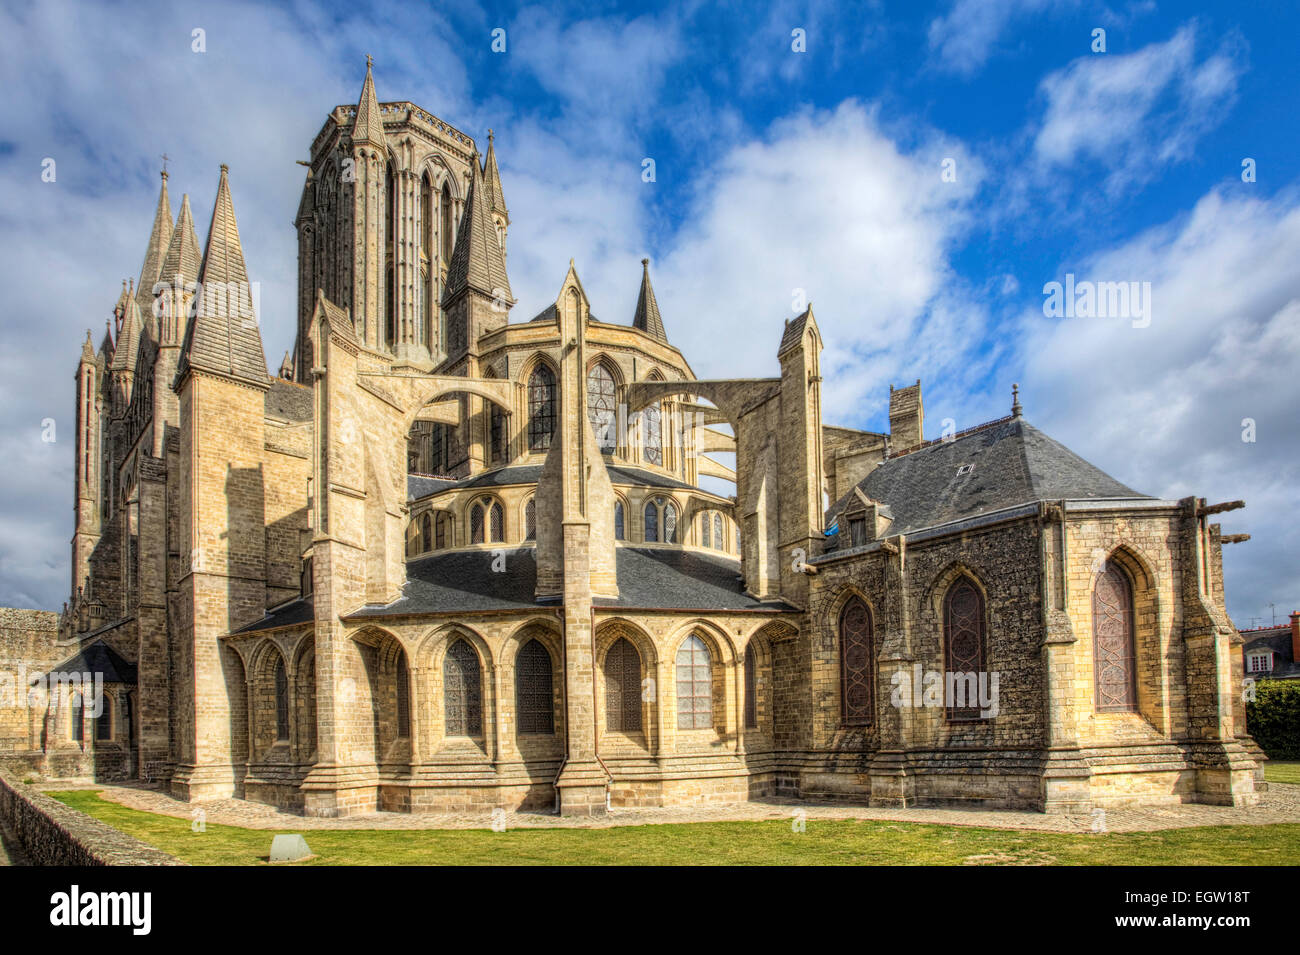 The beautiful cathedral at Coutance in France Stock Photo